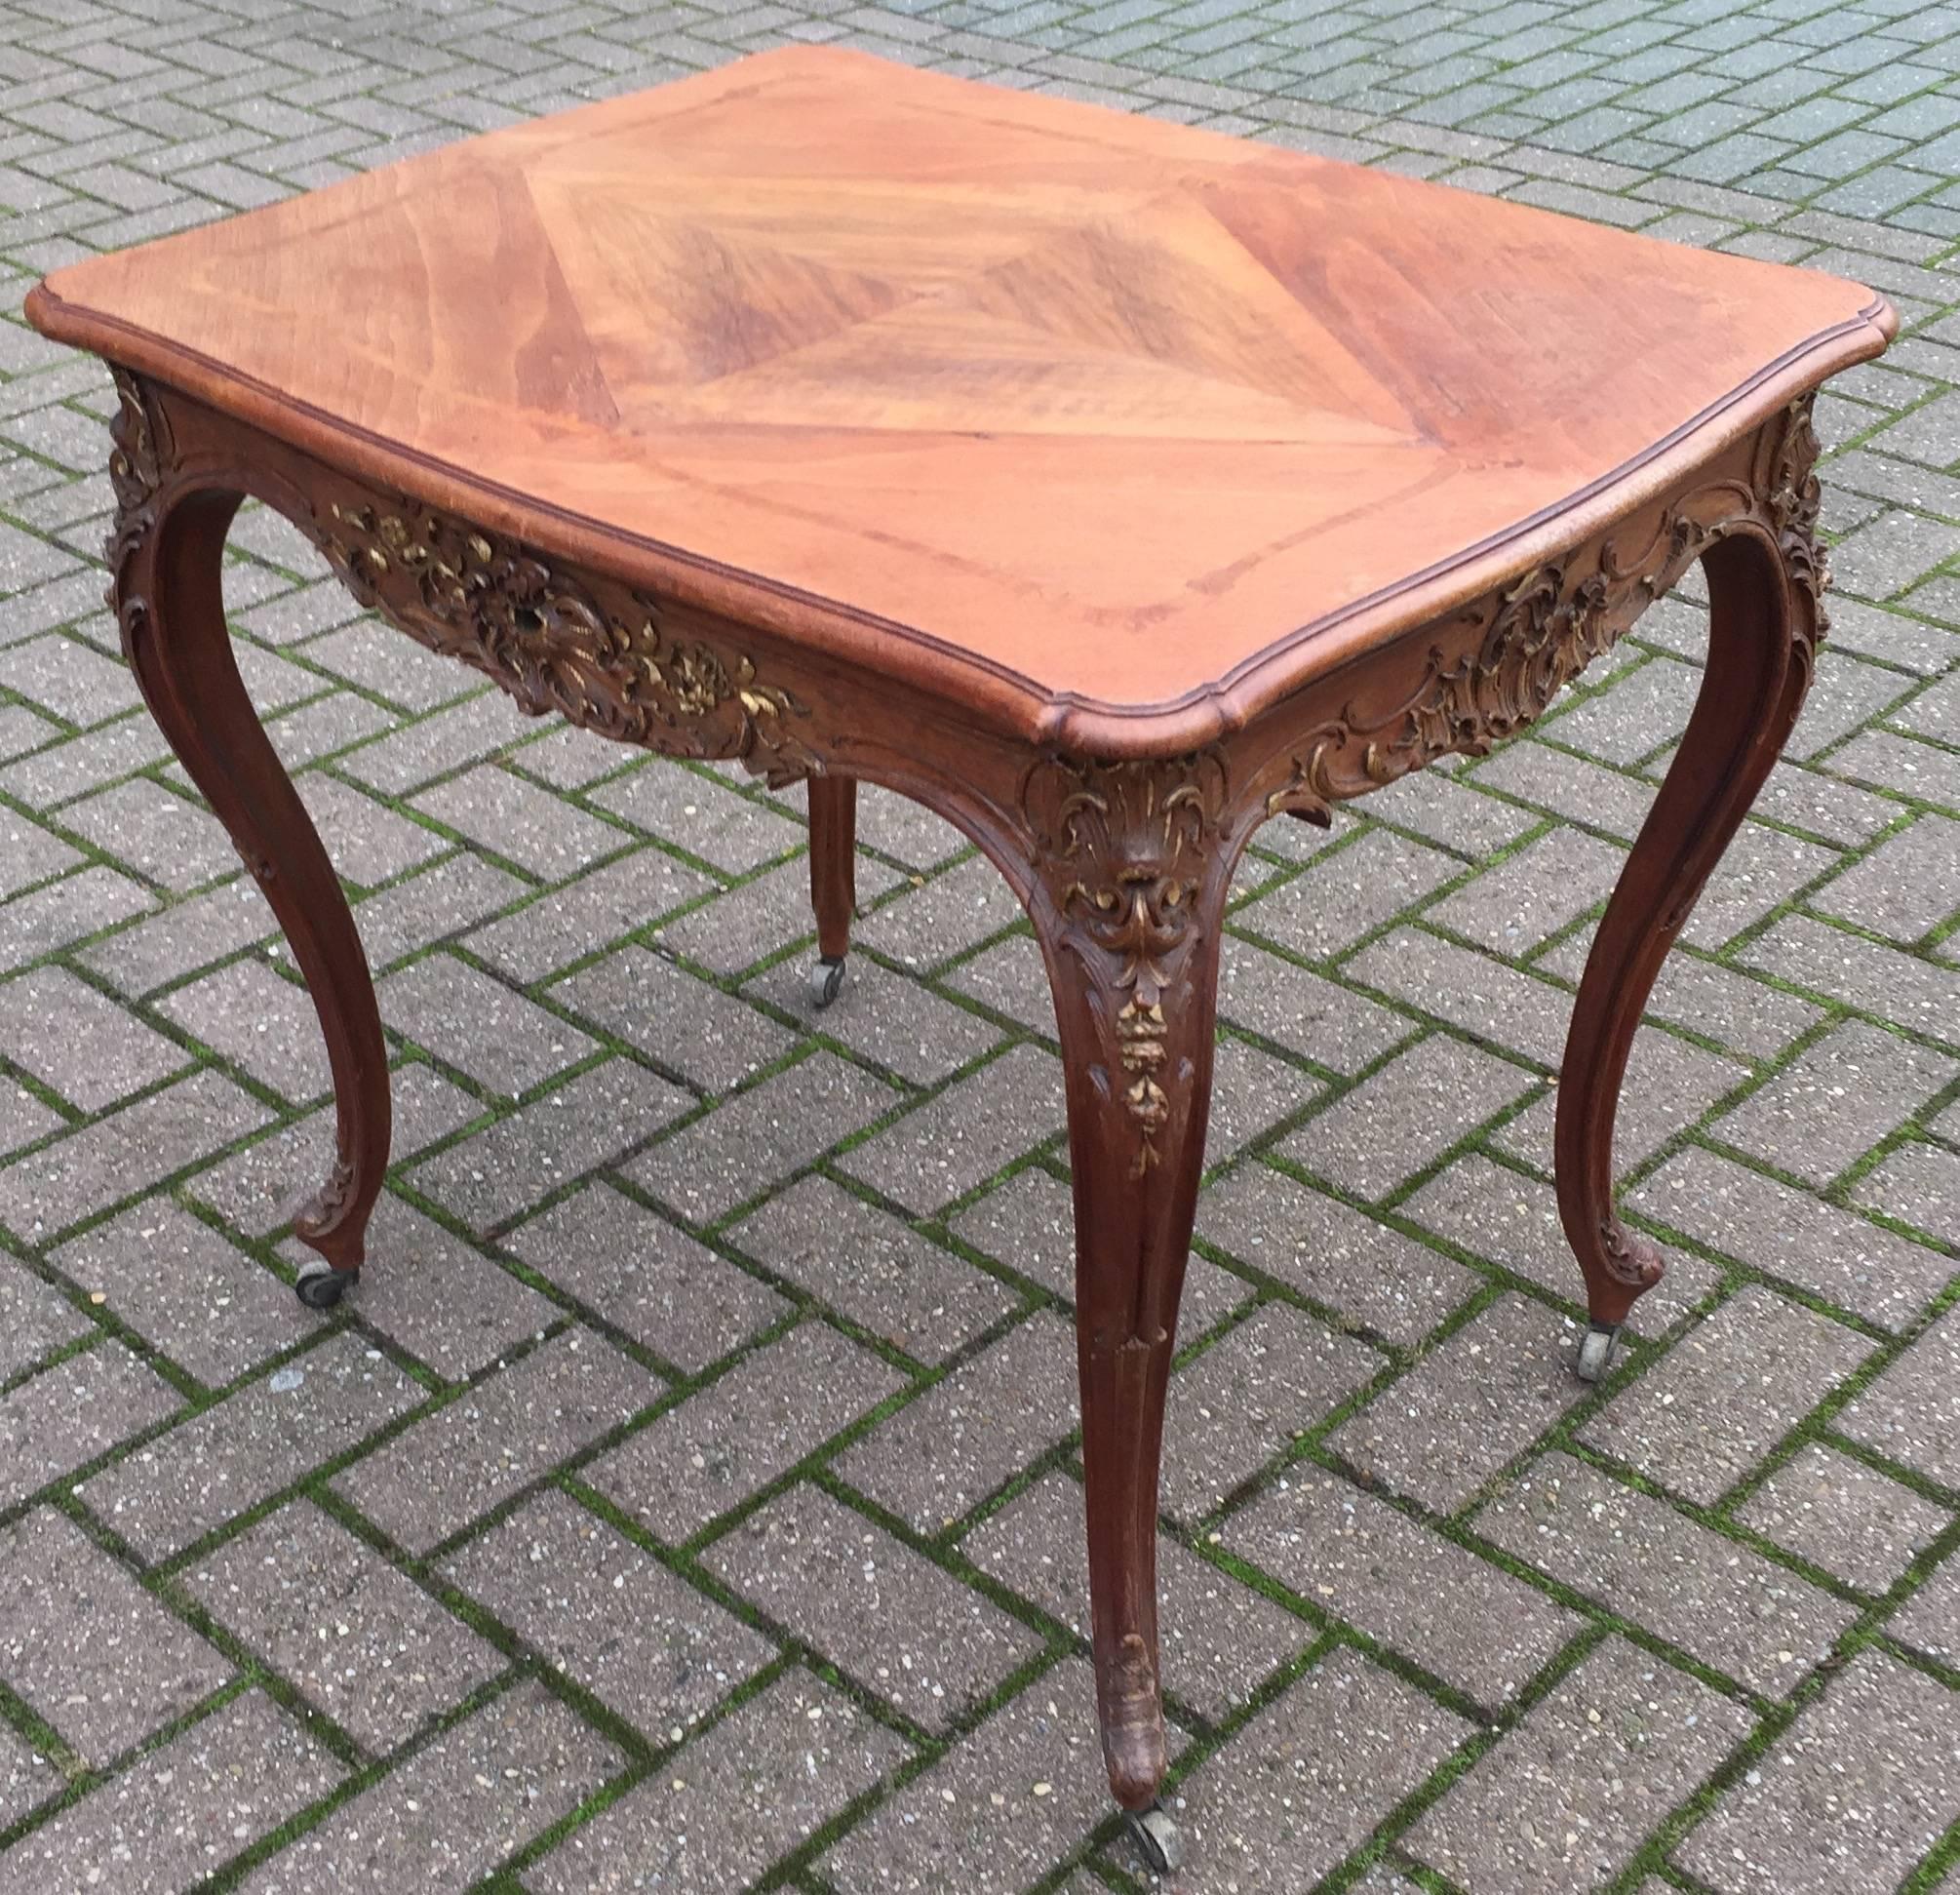 Elegant design and top quality carved multi purpose antique table.

The top of this beautifully designed and very well executed table is inlaid with a diamond in the center which grows into a larger, but more organic diamond as it moves outward. The